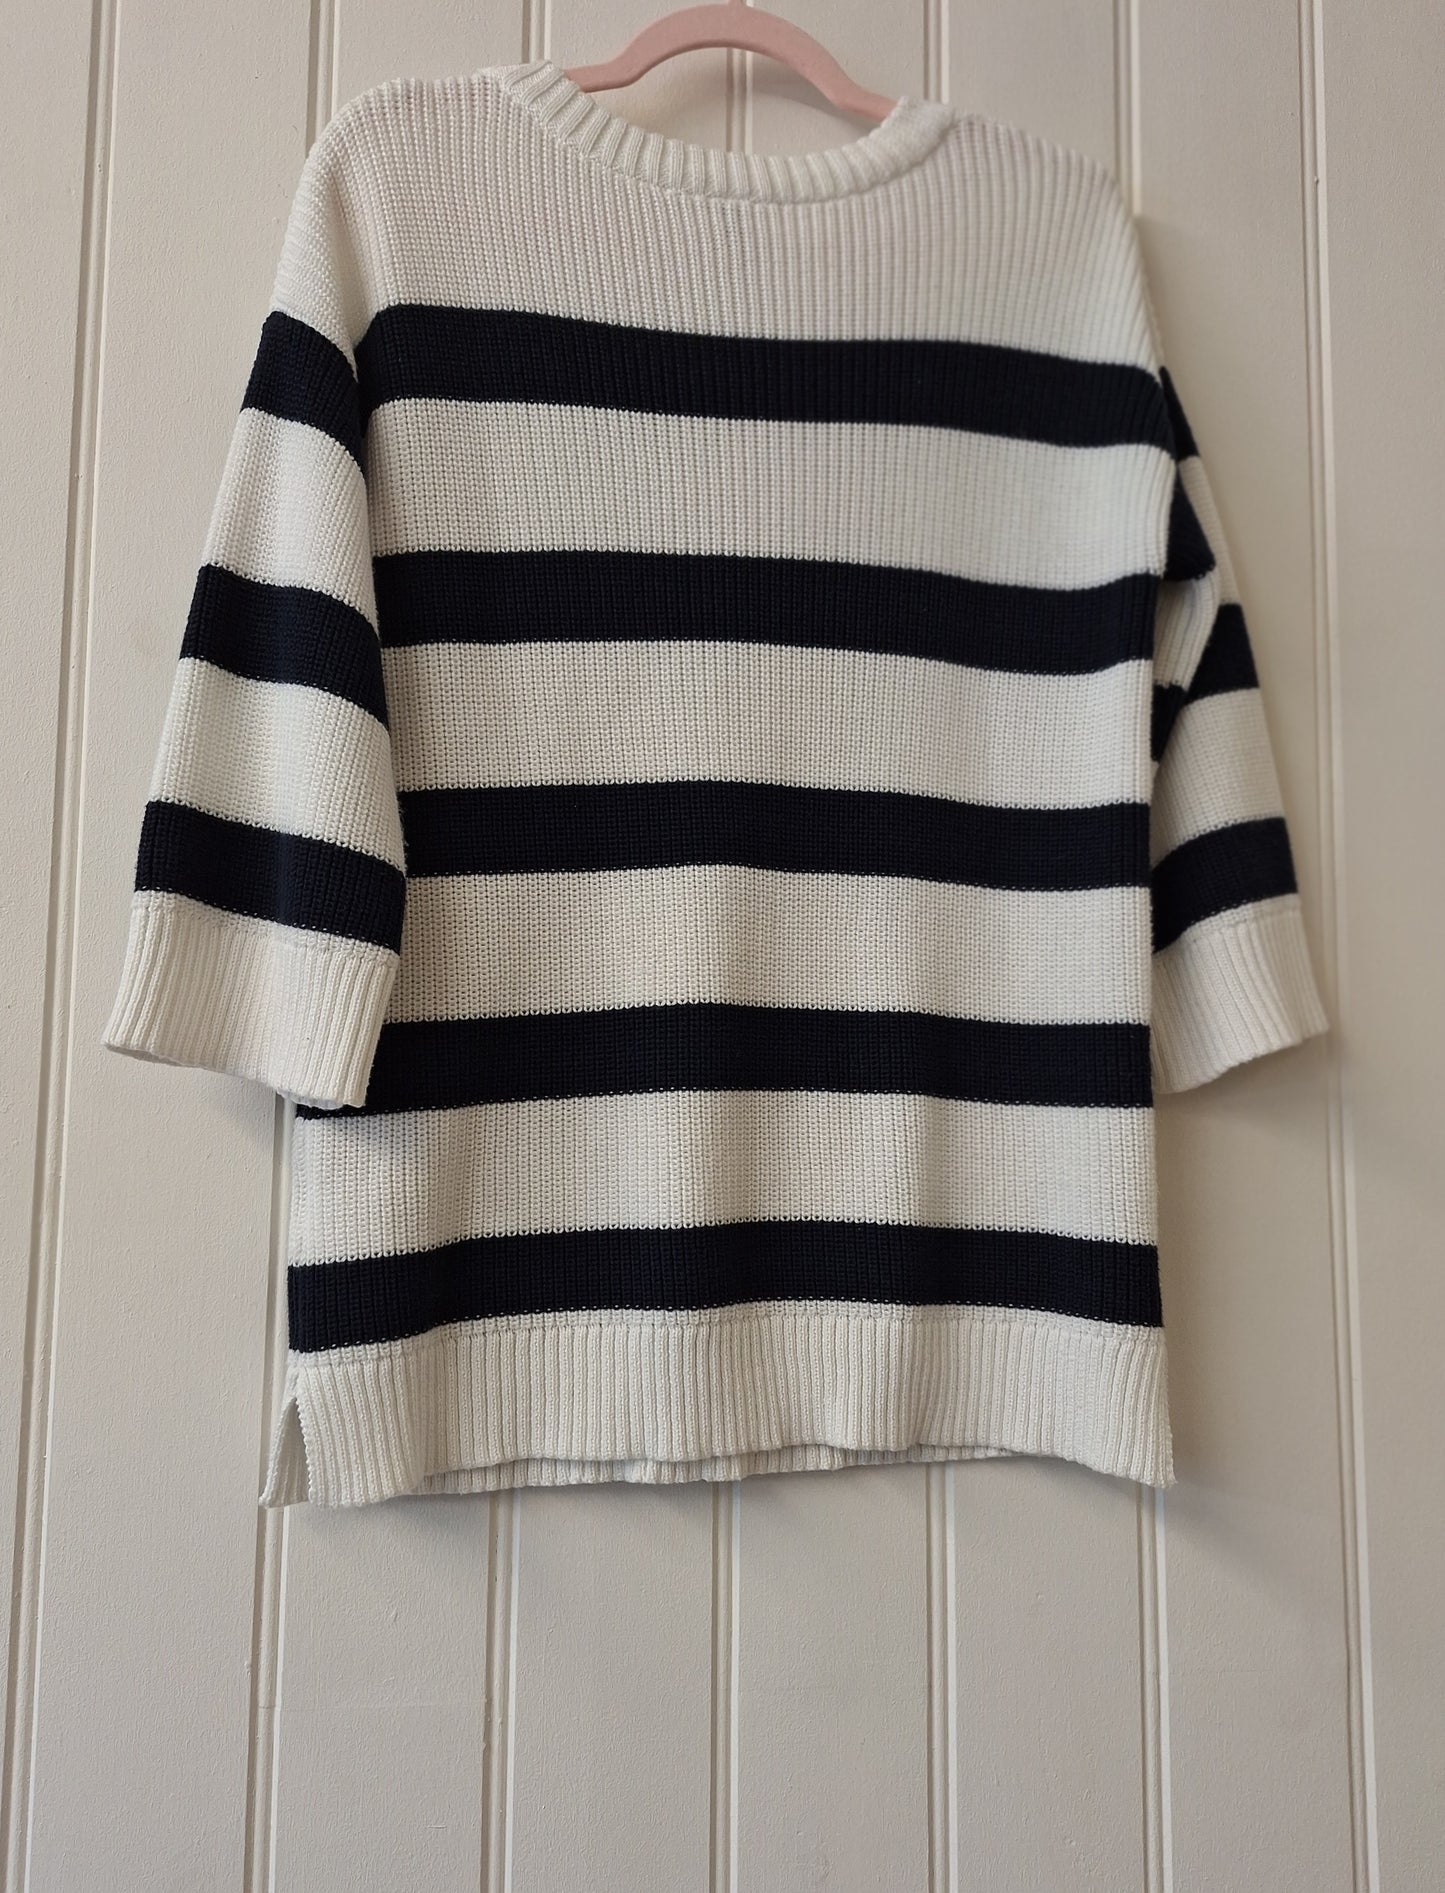 Soya Concept navy and white striped knit M